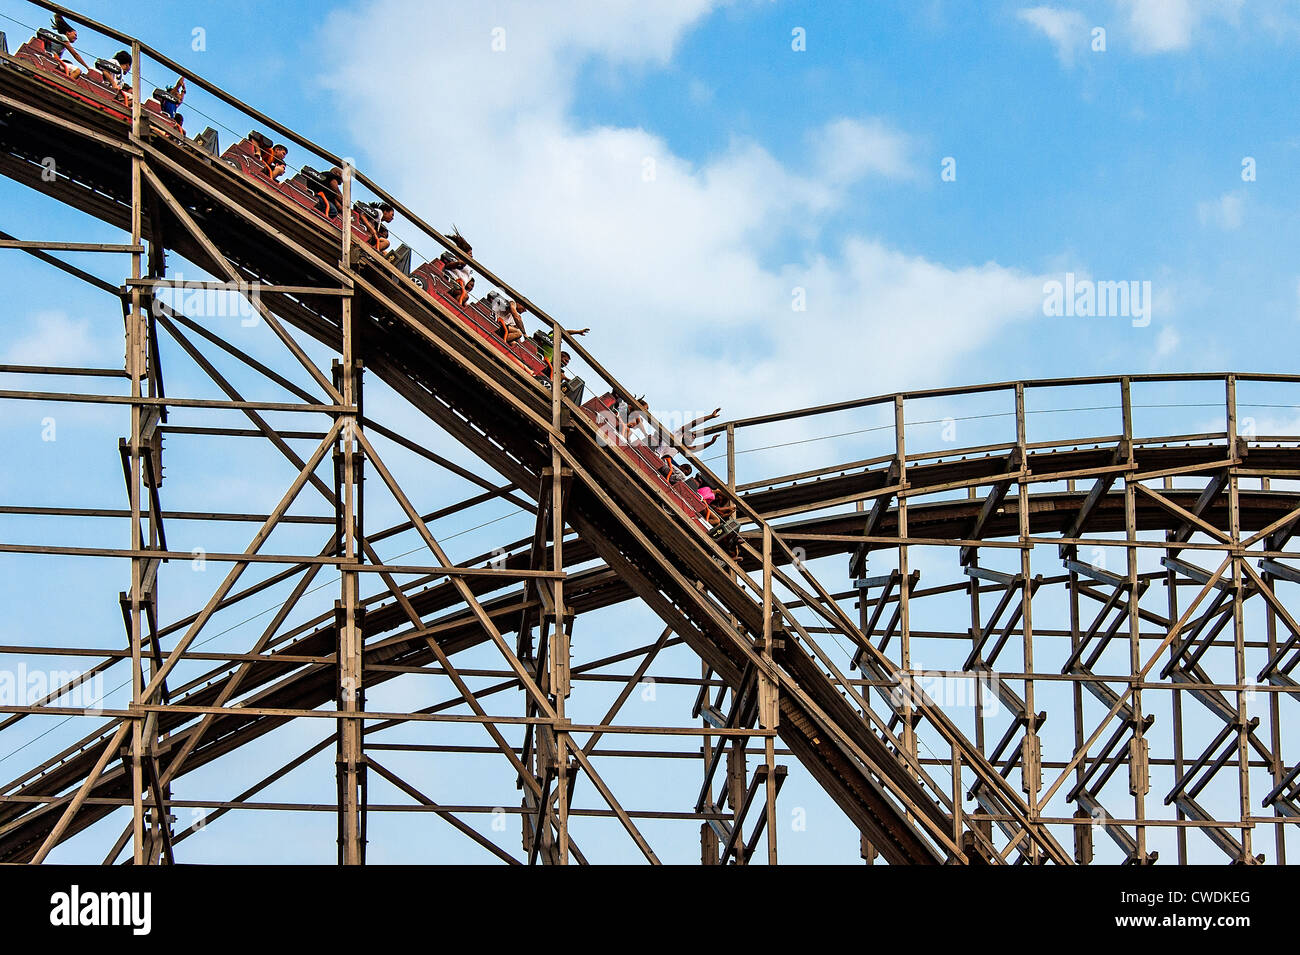 270 Six Flags Great Adventure Images, Stock Photos, 3D objects